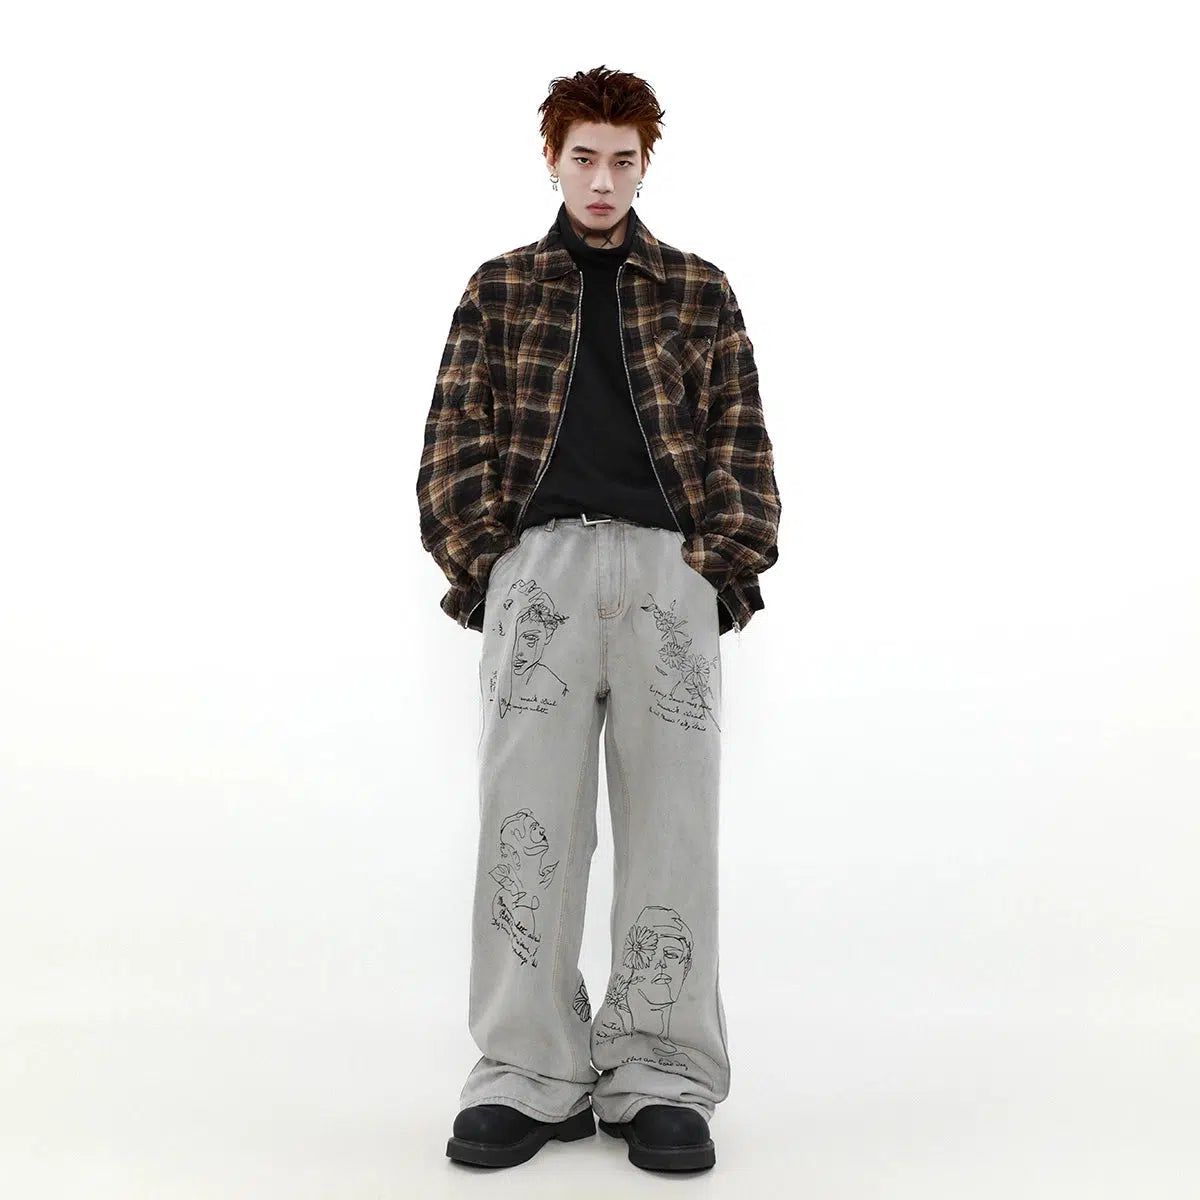 Front Pocket Plaid Shirt Korean Street Fashion Shirt By Mr Nearly Shop Online at OH Vault